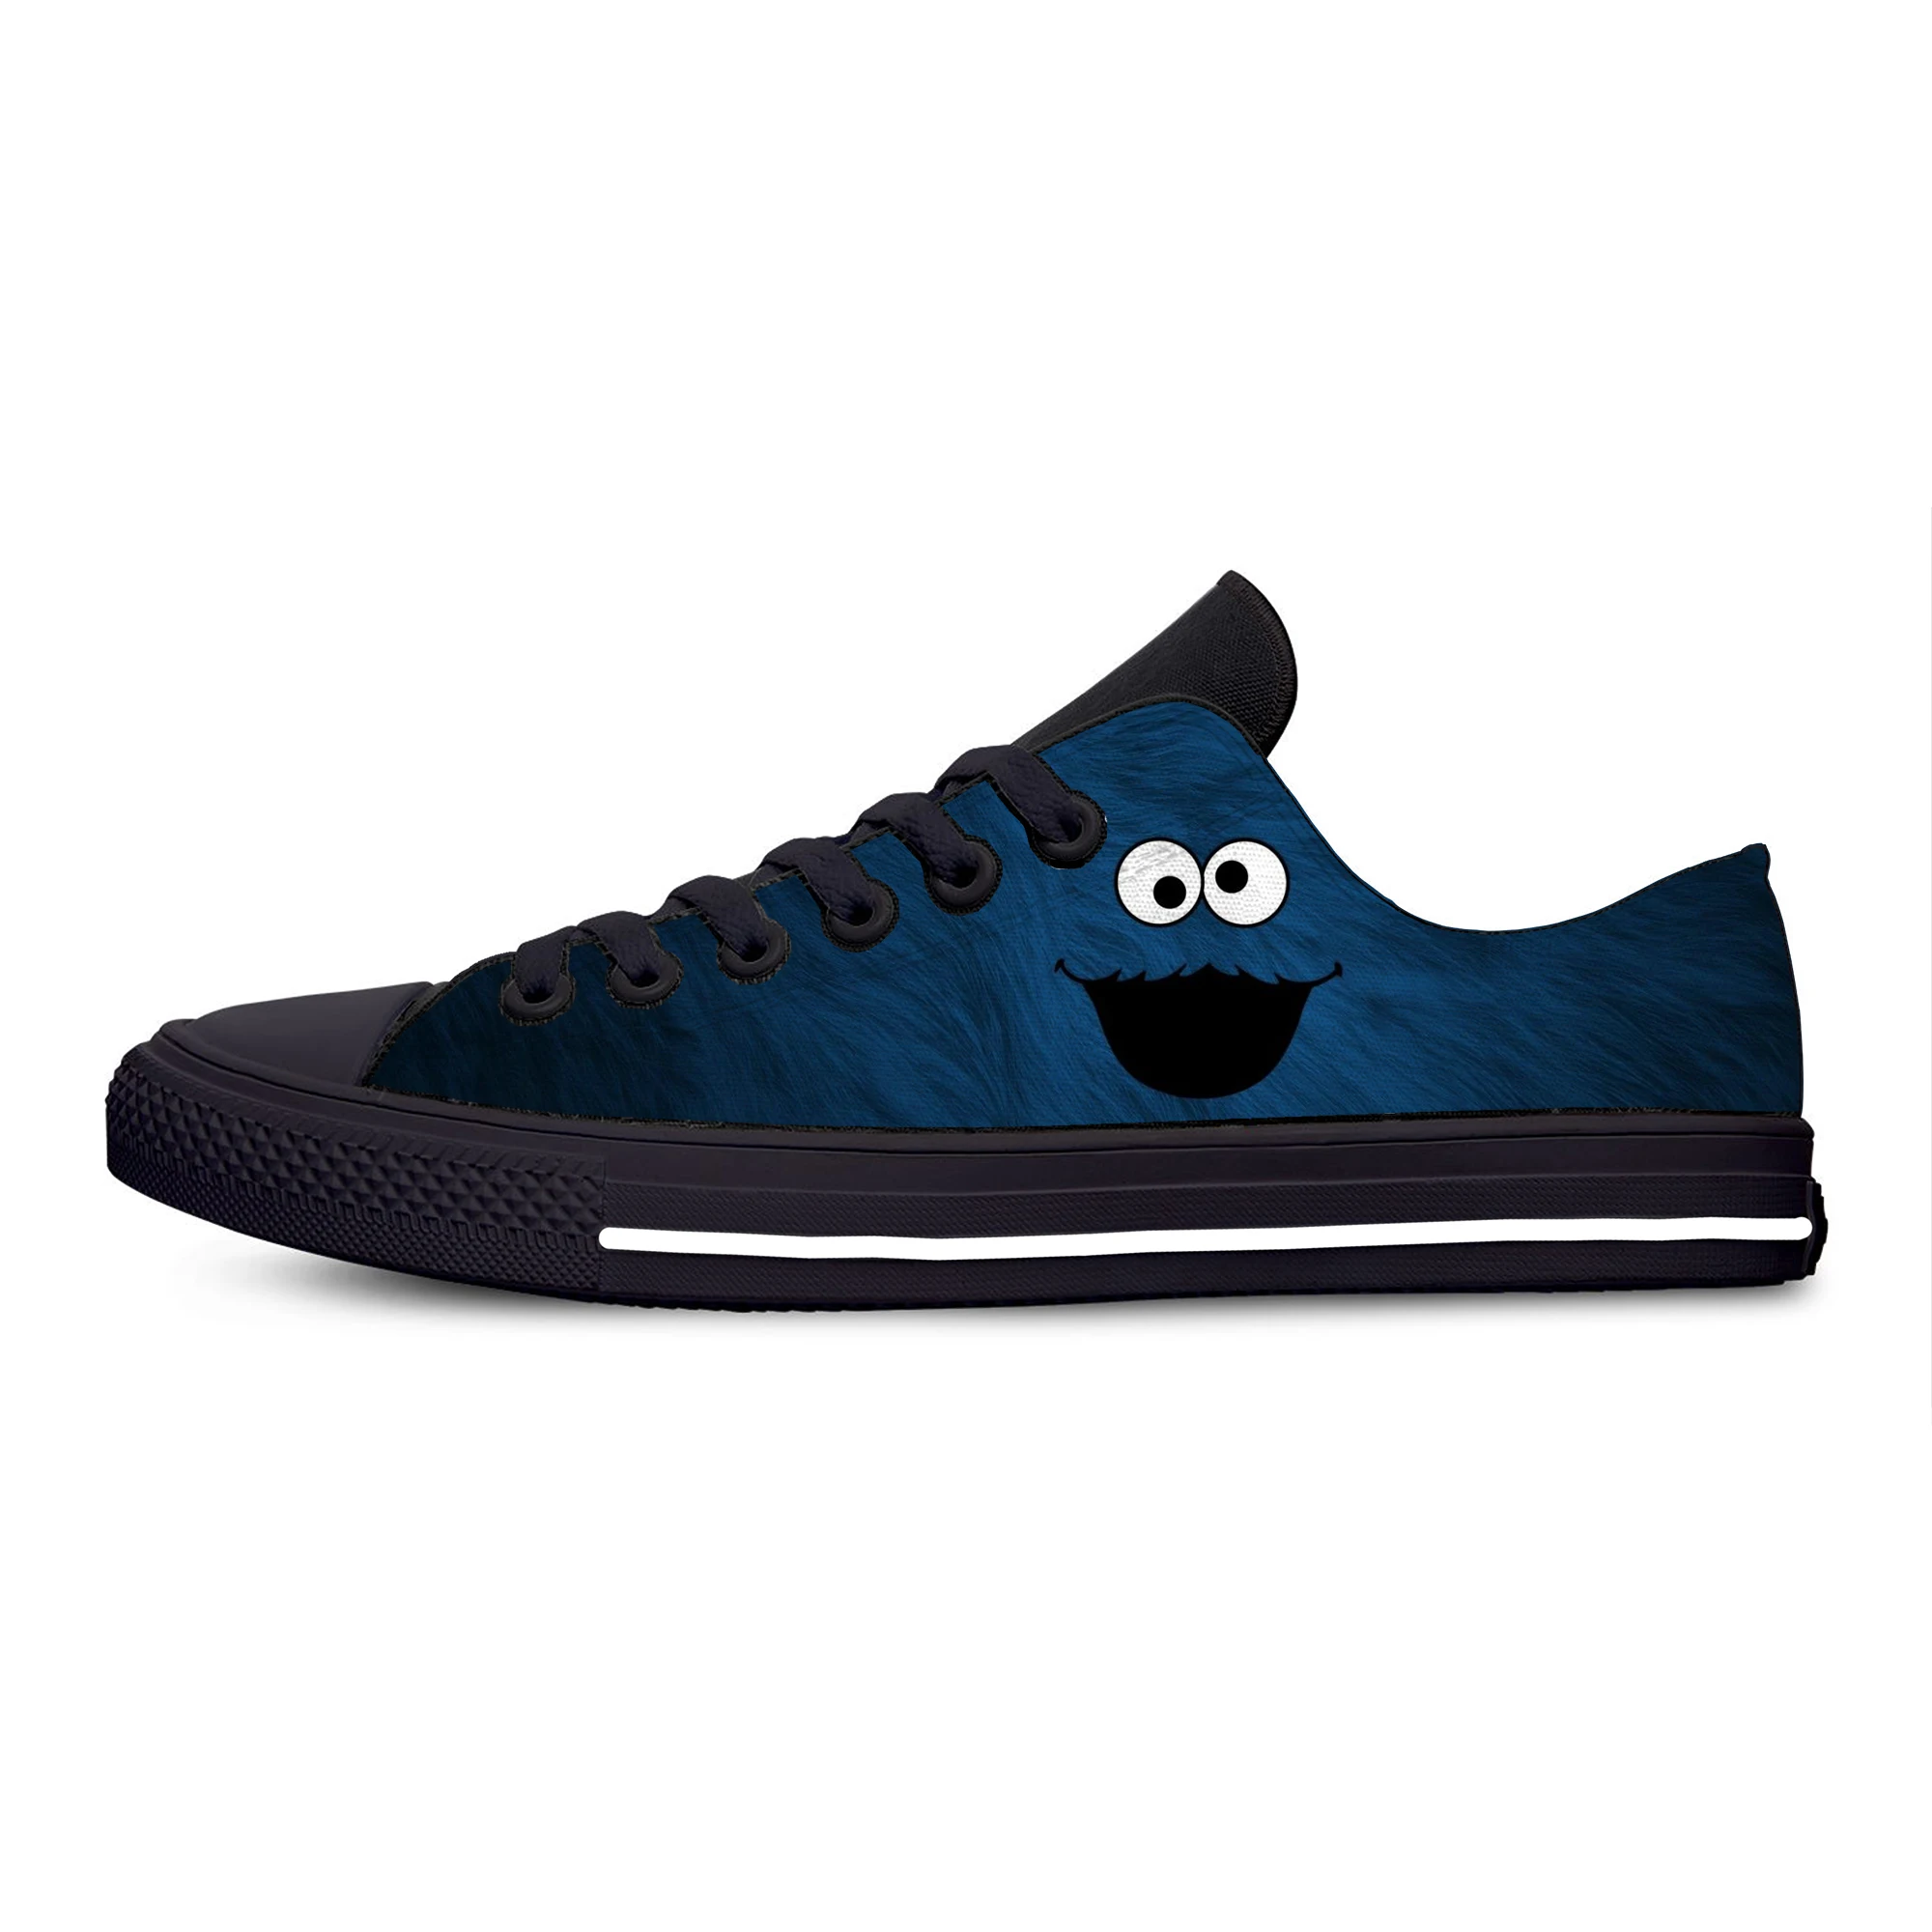 

Hot Cookie Monster Anime Cartoon Manga Funny Fashion Casual Shoes Low Top Lightweight Board Shoes Breathable Men Women Sneakers